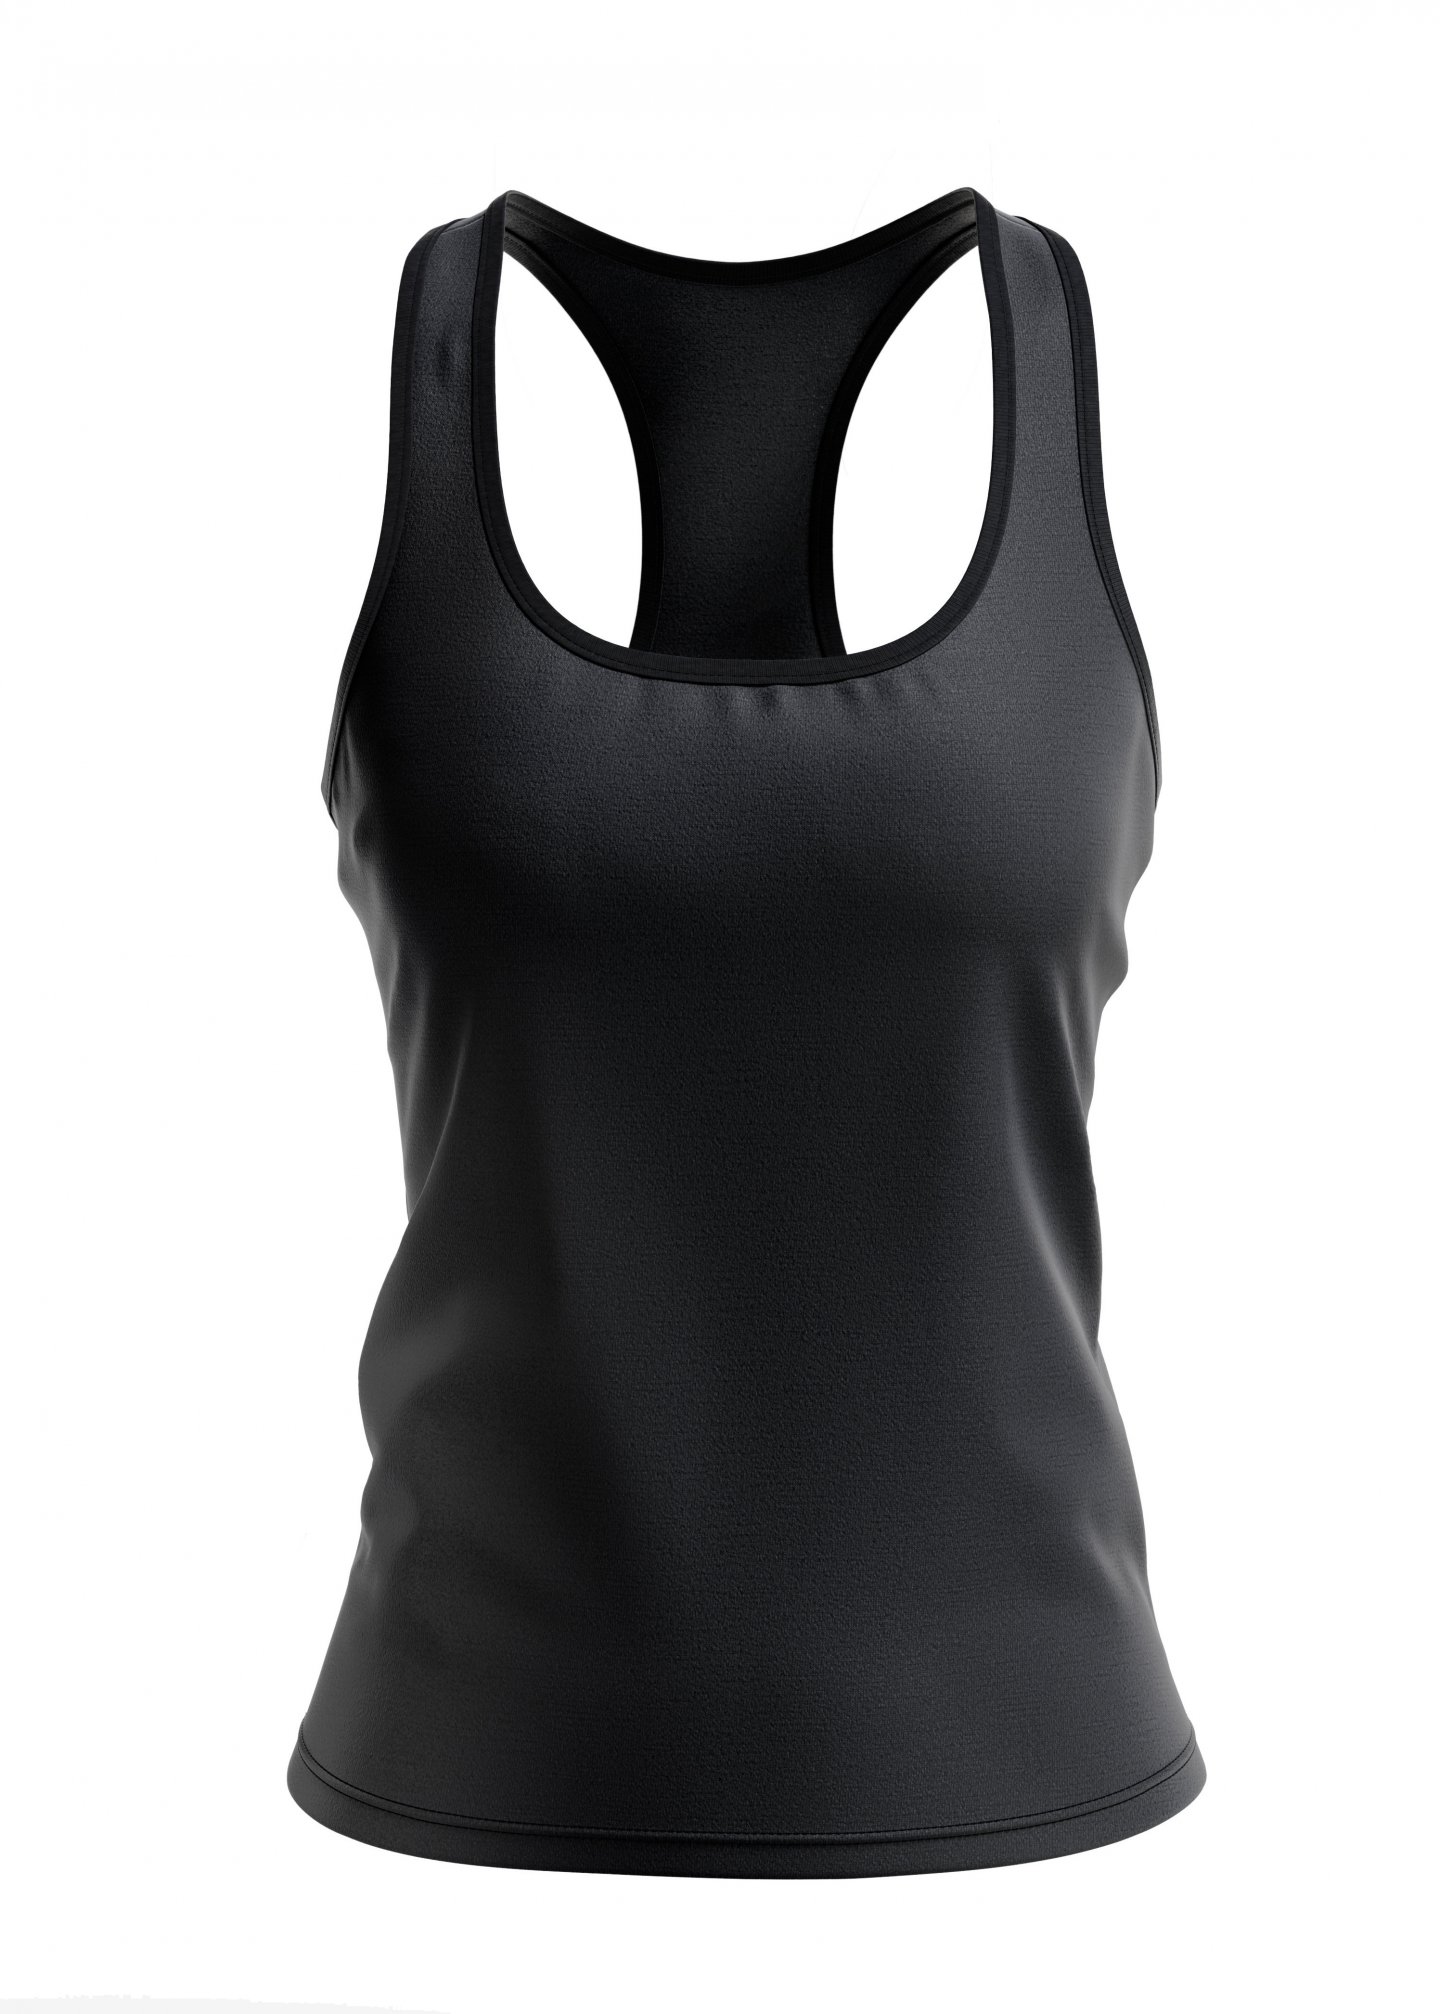 https://www.signal-sportswear.com/archive/image/product1/signal_sportswear-_yoga-bra-tank_top_-workout_005-_manufacturer_in_cambodia_and_china.jpg